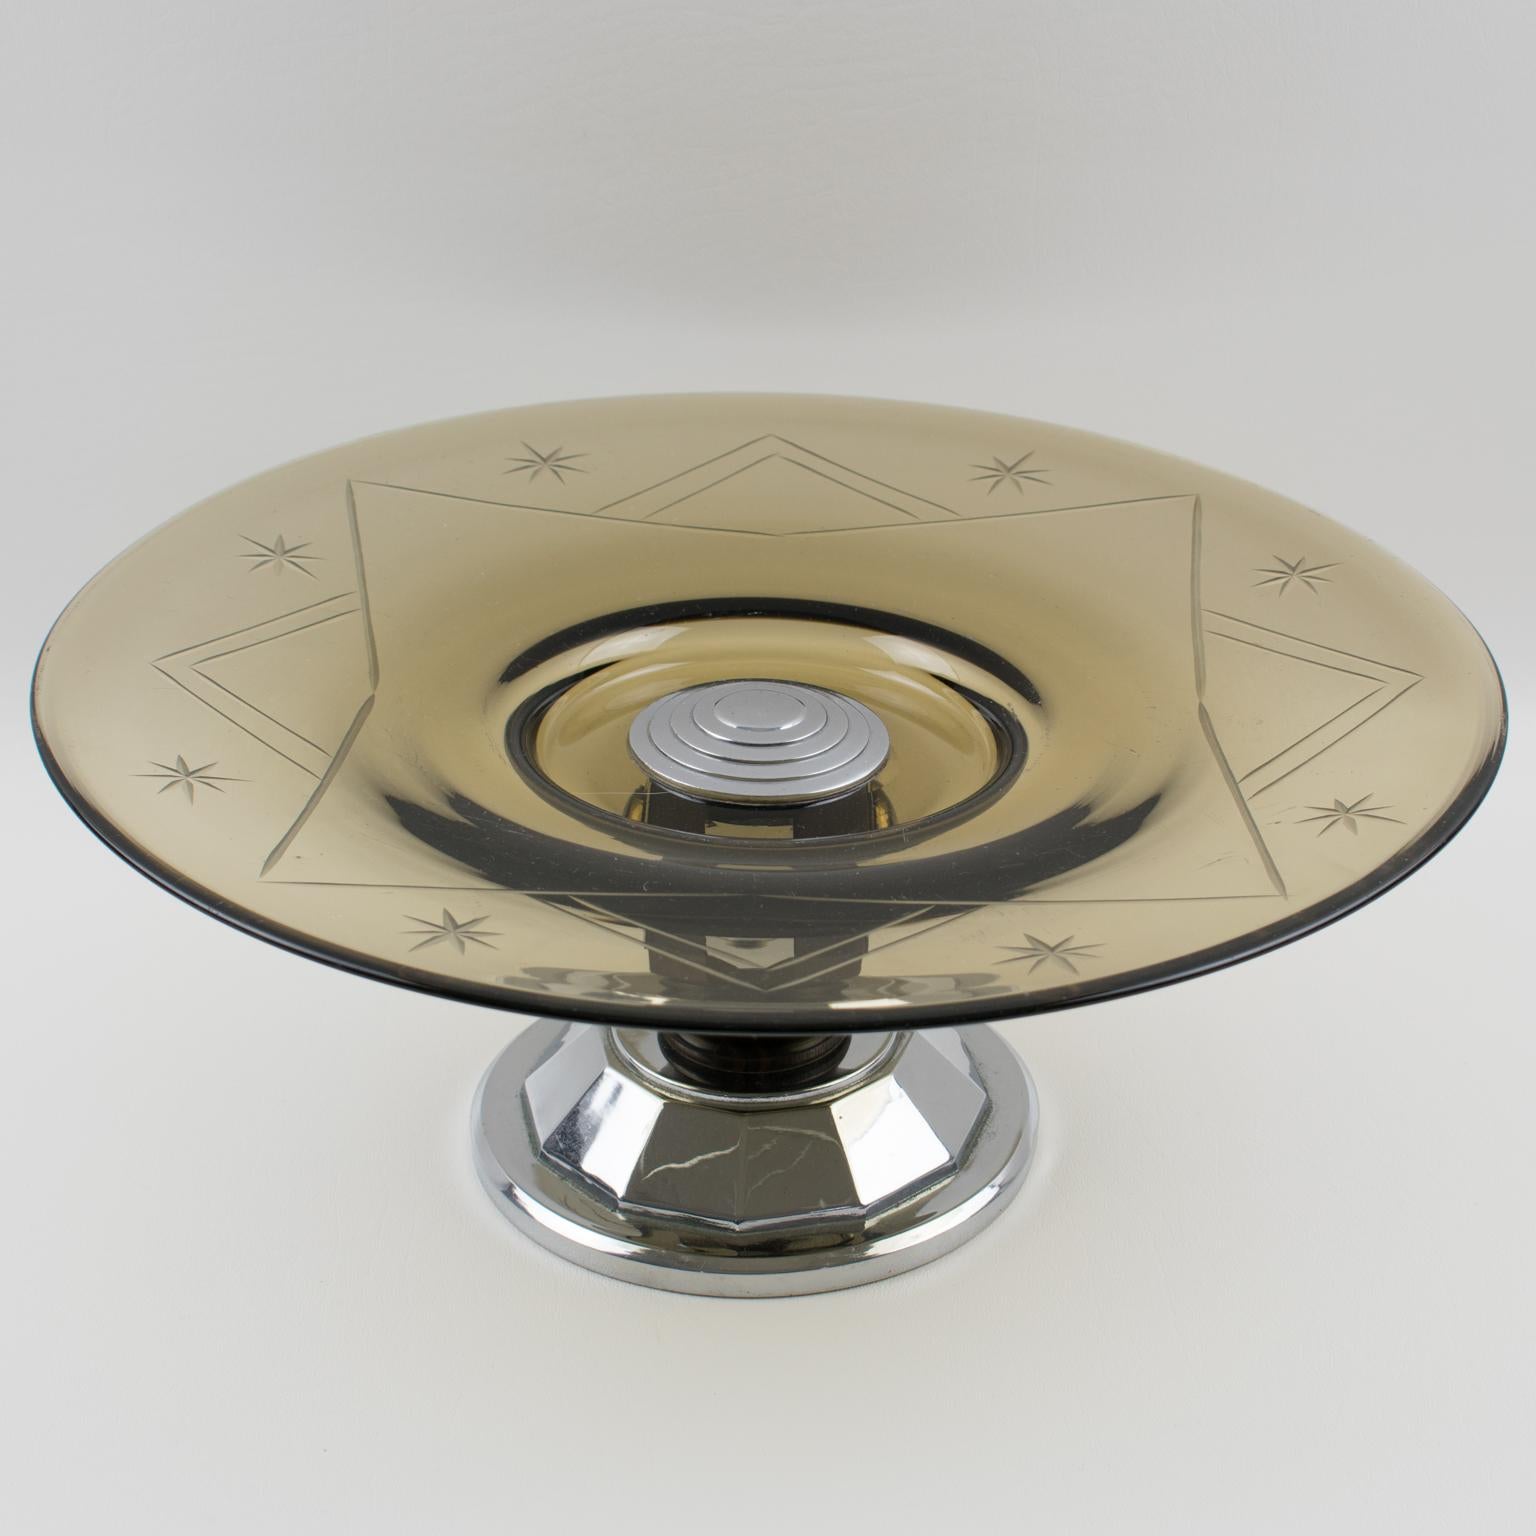 This stylish French Art Deco modernist decorative centerpiece or serving bowl features a large round glass bowl with an etched pattern in a lovely transparent smoke gray color. The pedestal base is in chromed metal and Macassar wood with a unique